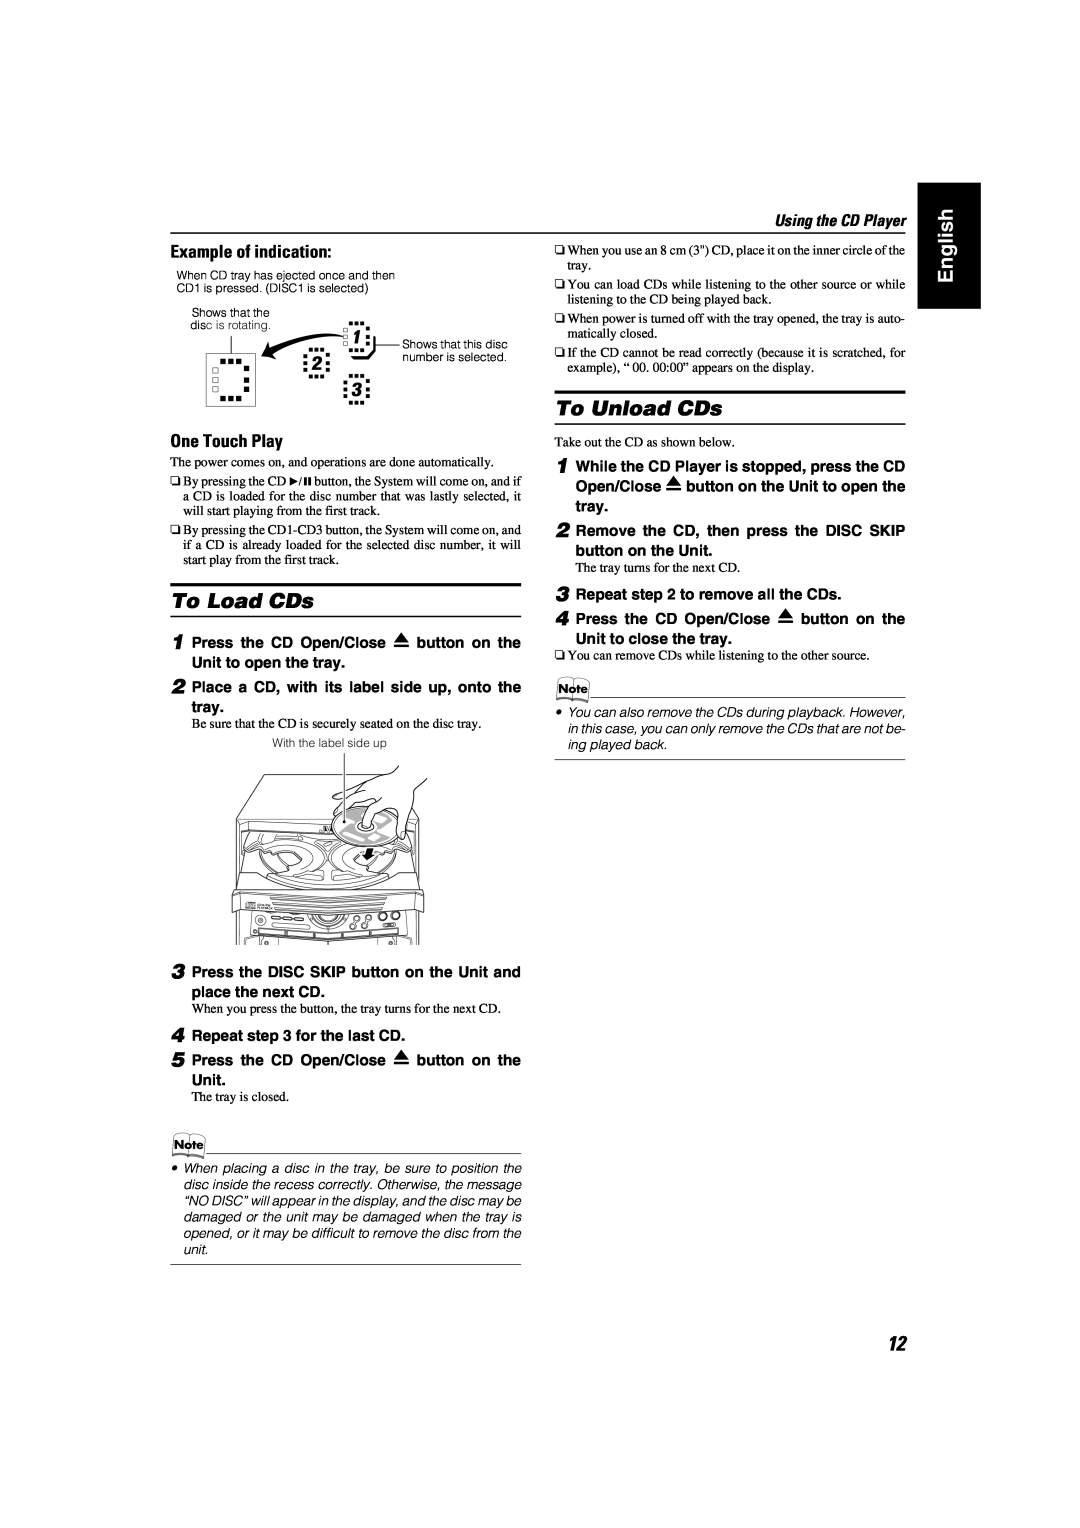 JVC MX-KA7 manual To Load CDs, To Unload CDs, Example of indication, One Touch Play, Using the CD Player, English 